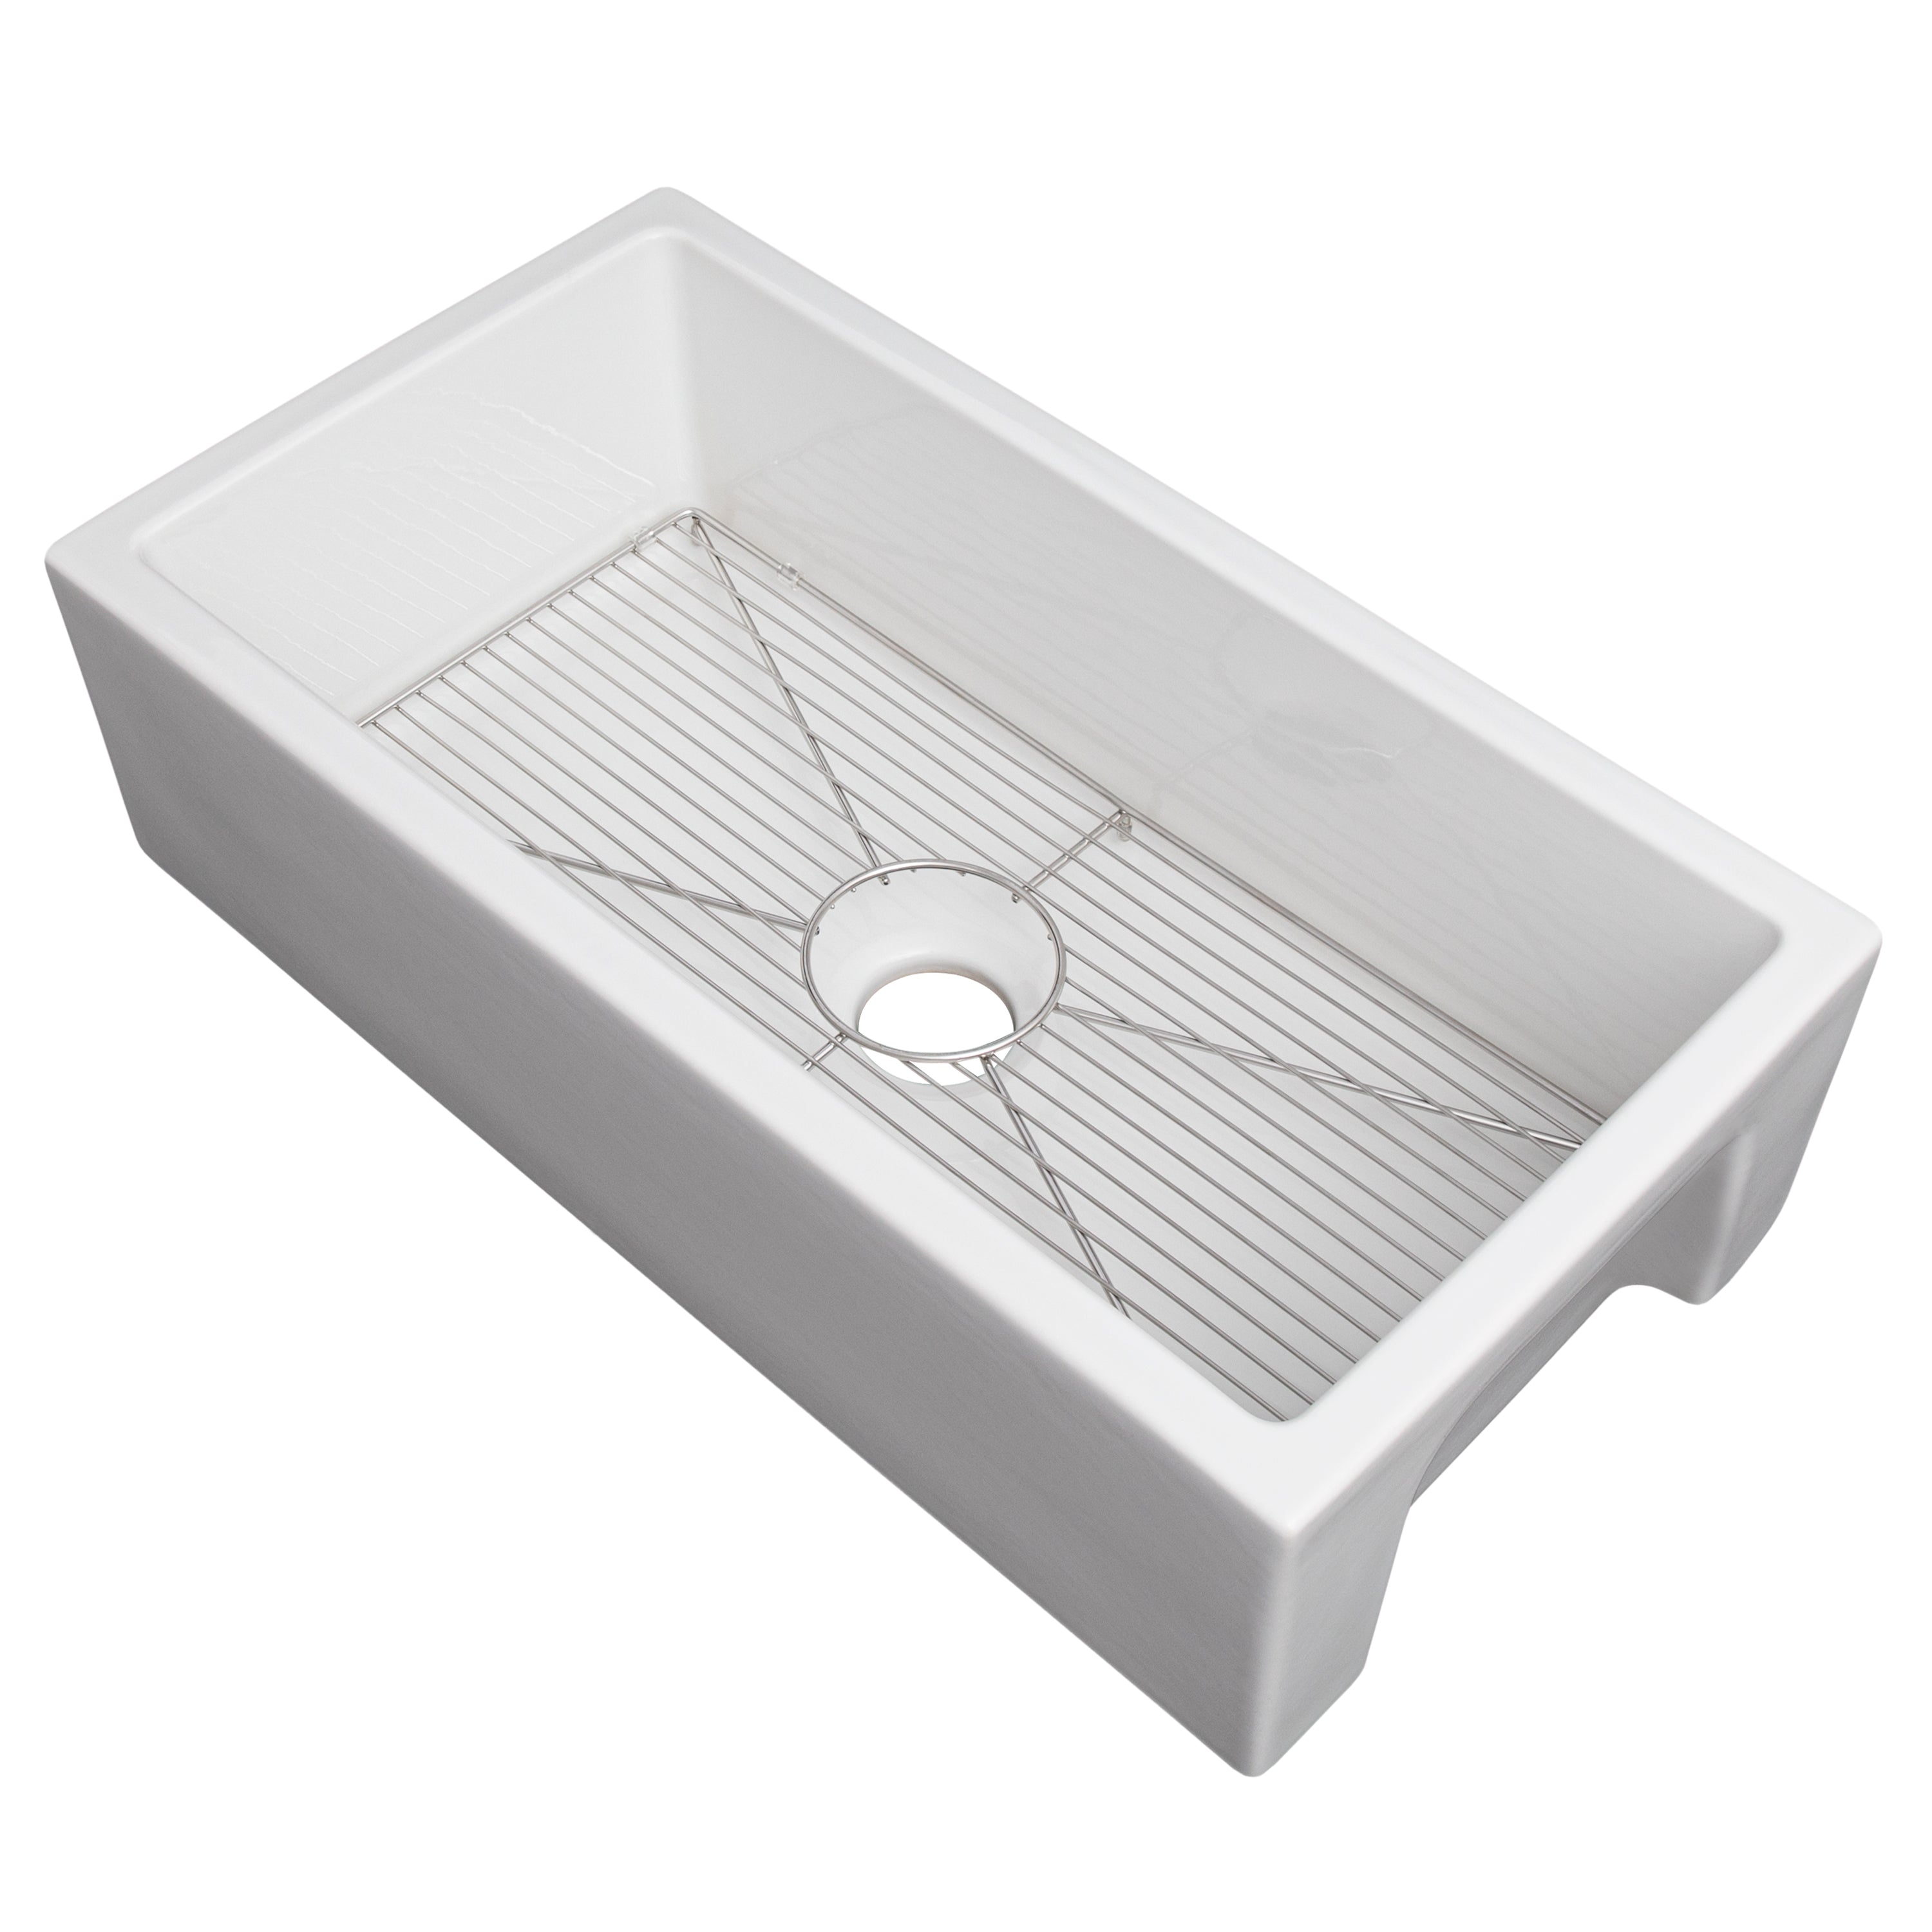 ZLINE 33" Venice Farmhouse Apron Front Single Bowl Reversible Fireclay Kitchen Sink with Bottom Grid in White Gloss (FRC5131-WH-33)